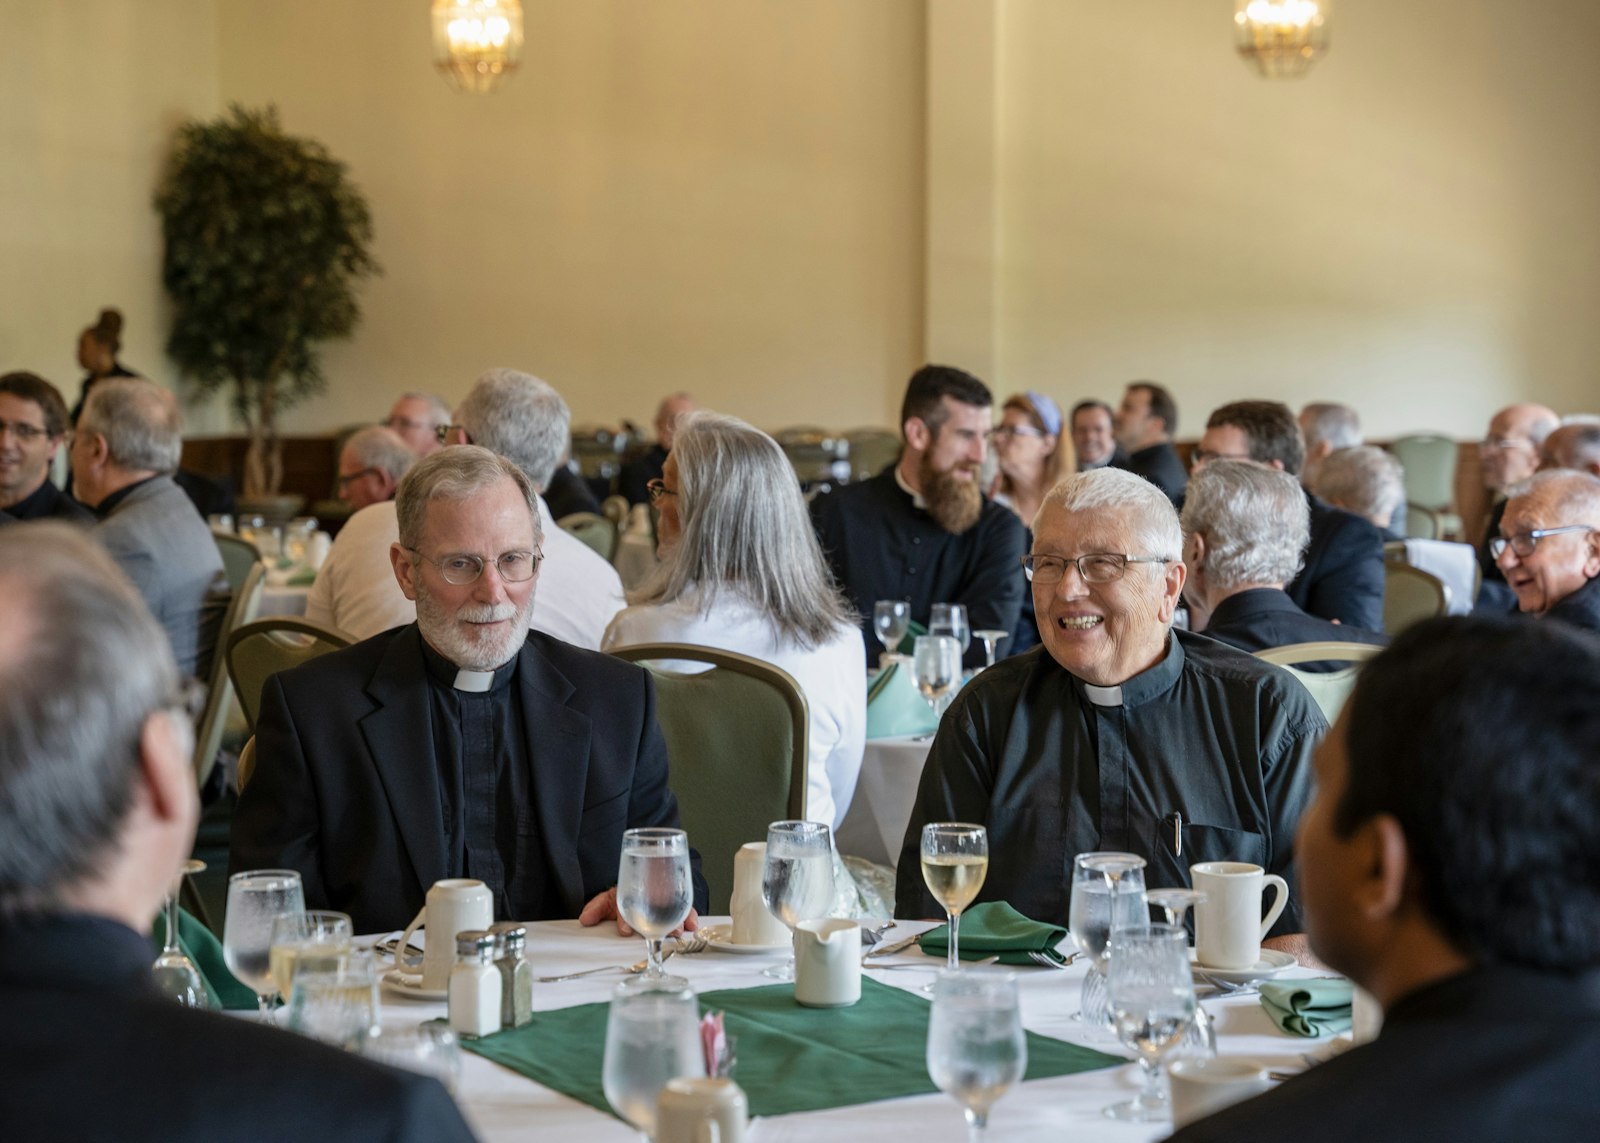 Fr. John Esper, left, and Fr. Richard Treml, right, converse during a luncheon celebrating this year's jubilarians. Fr. Treml is celebrating his 25th jubilee this year.